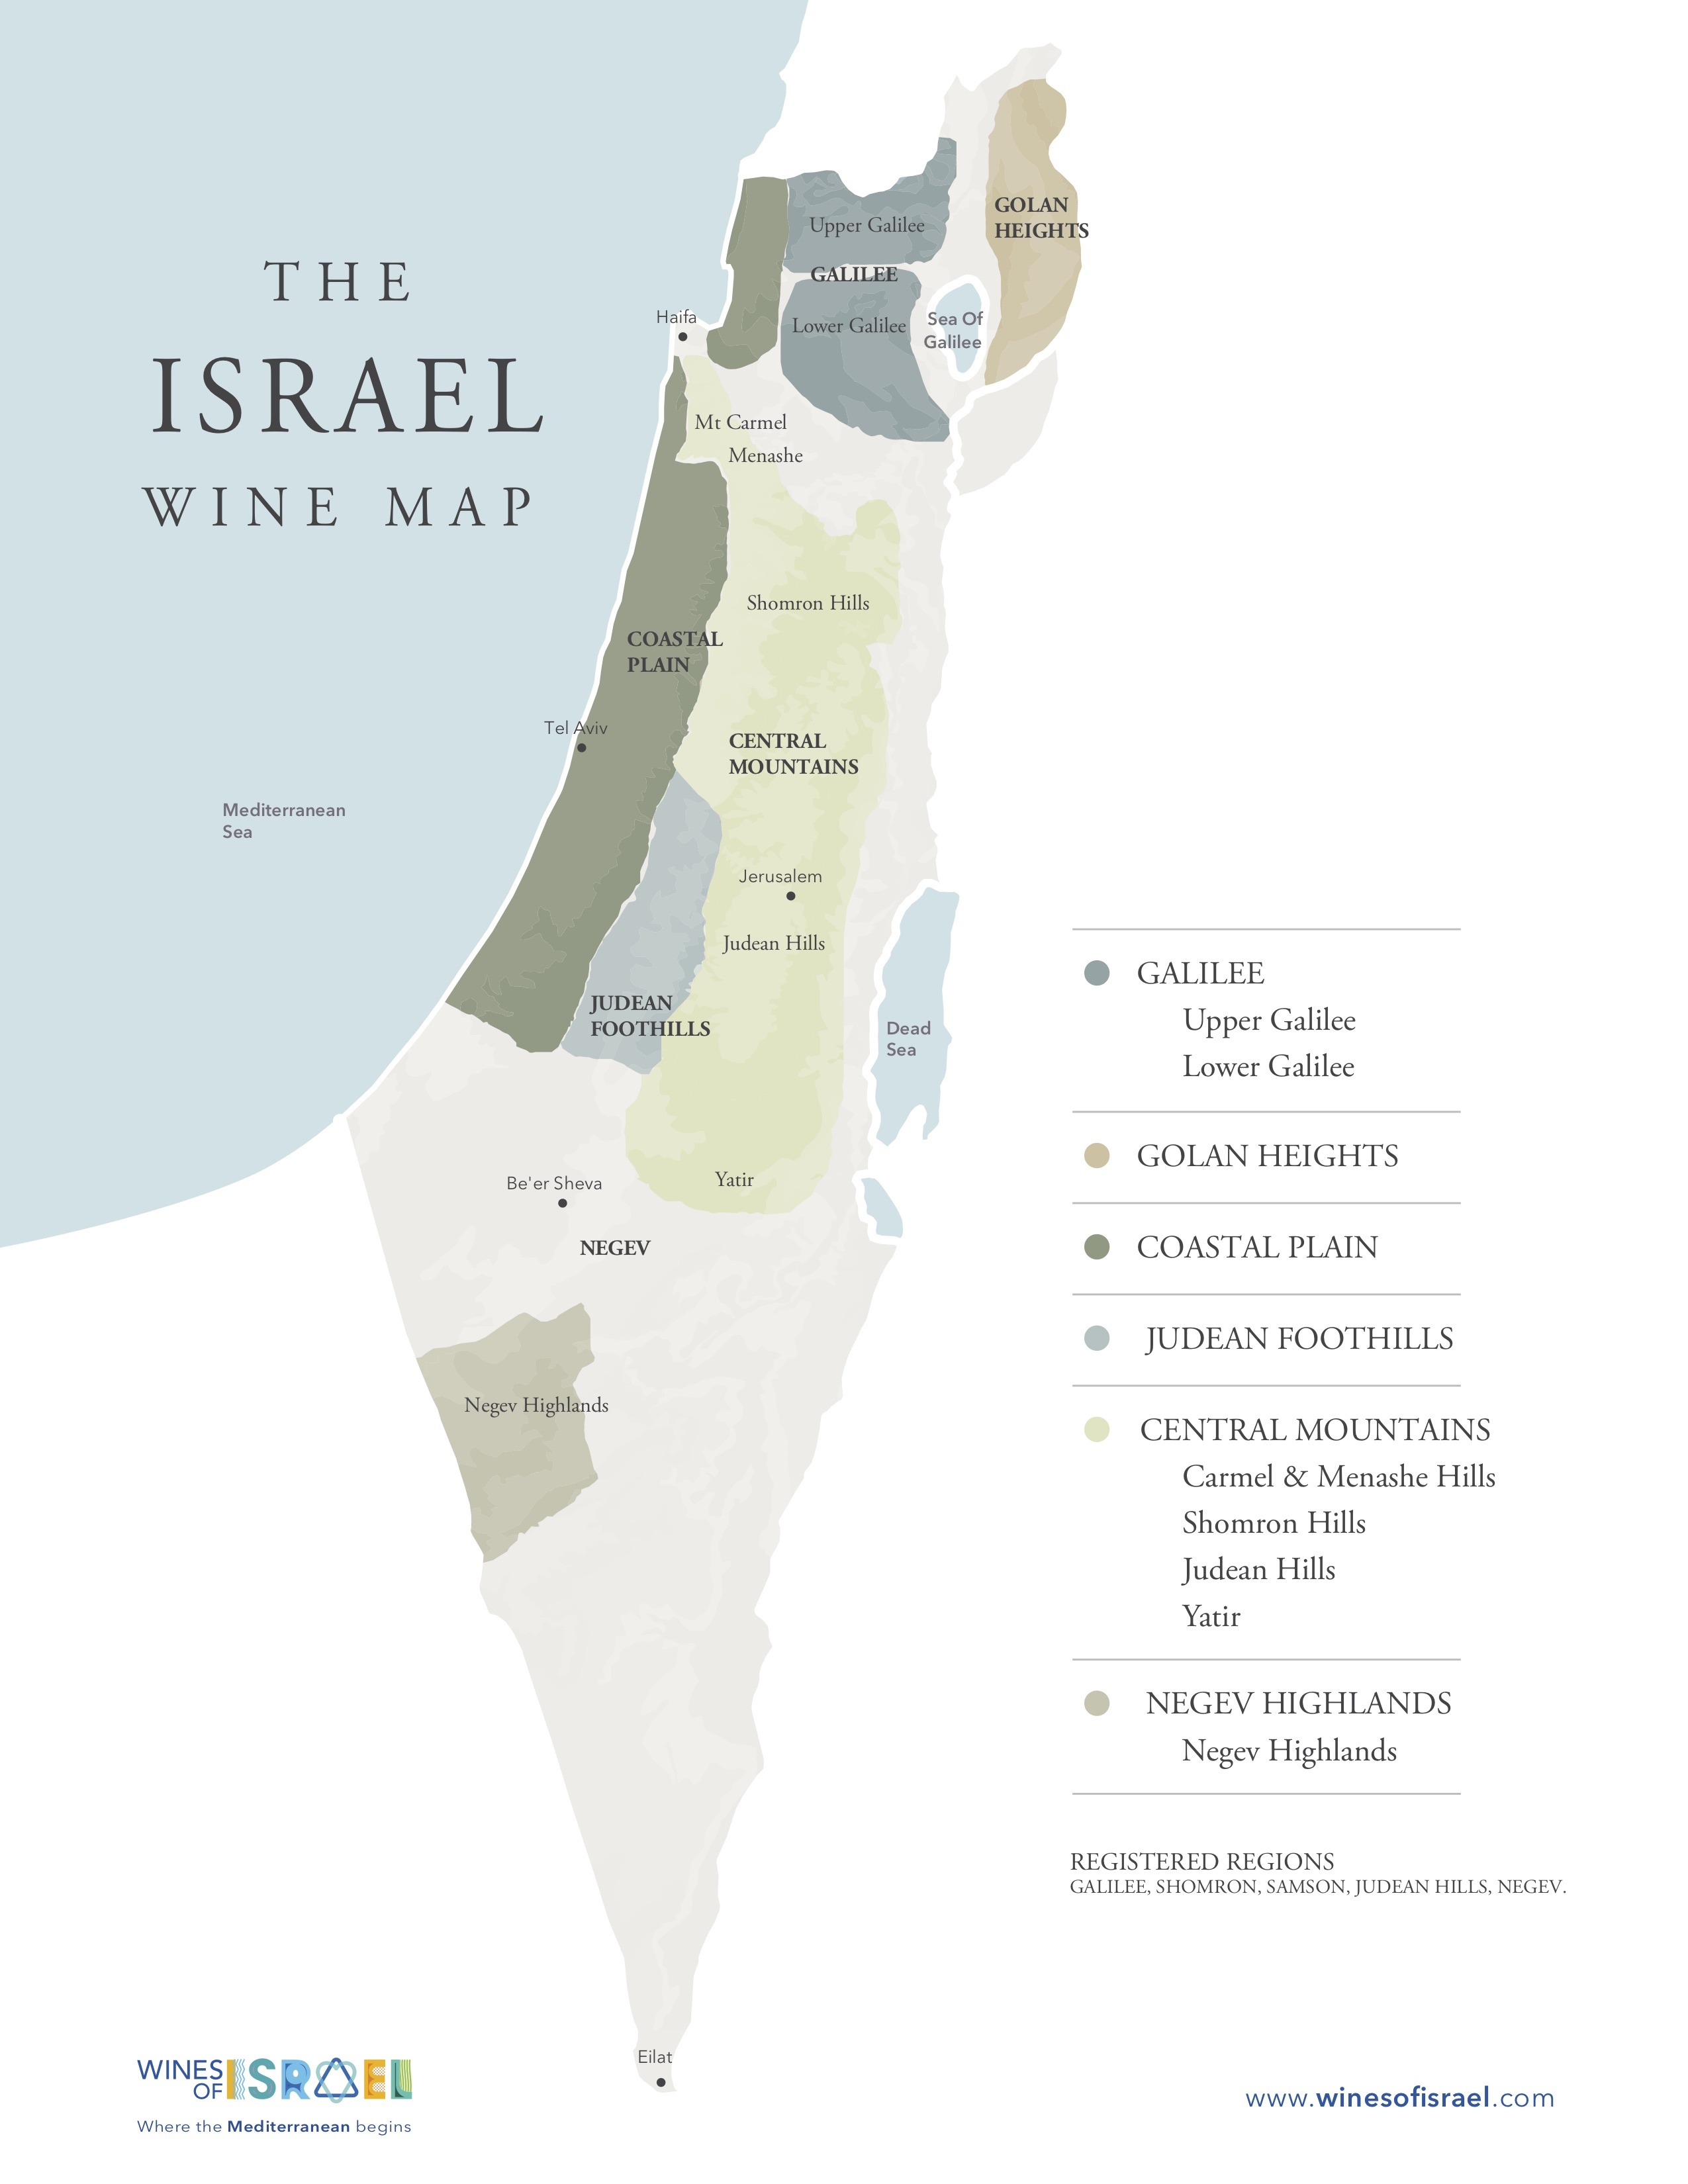 Wines of Israel Map at a Glance